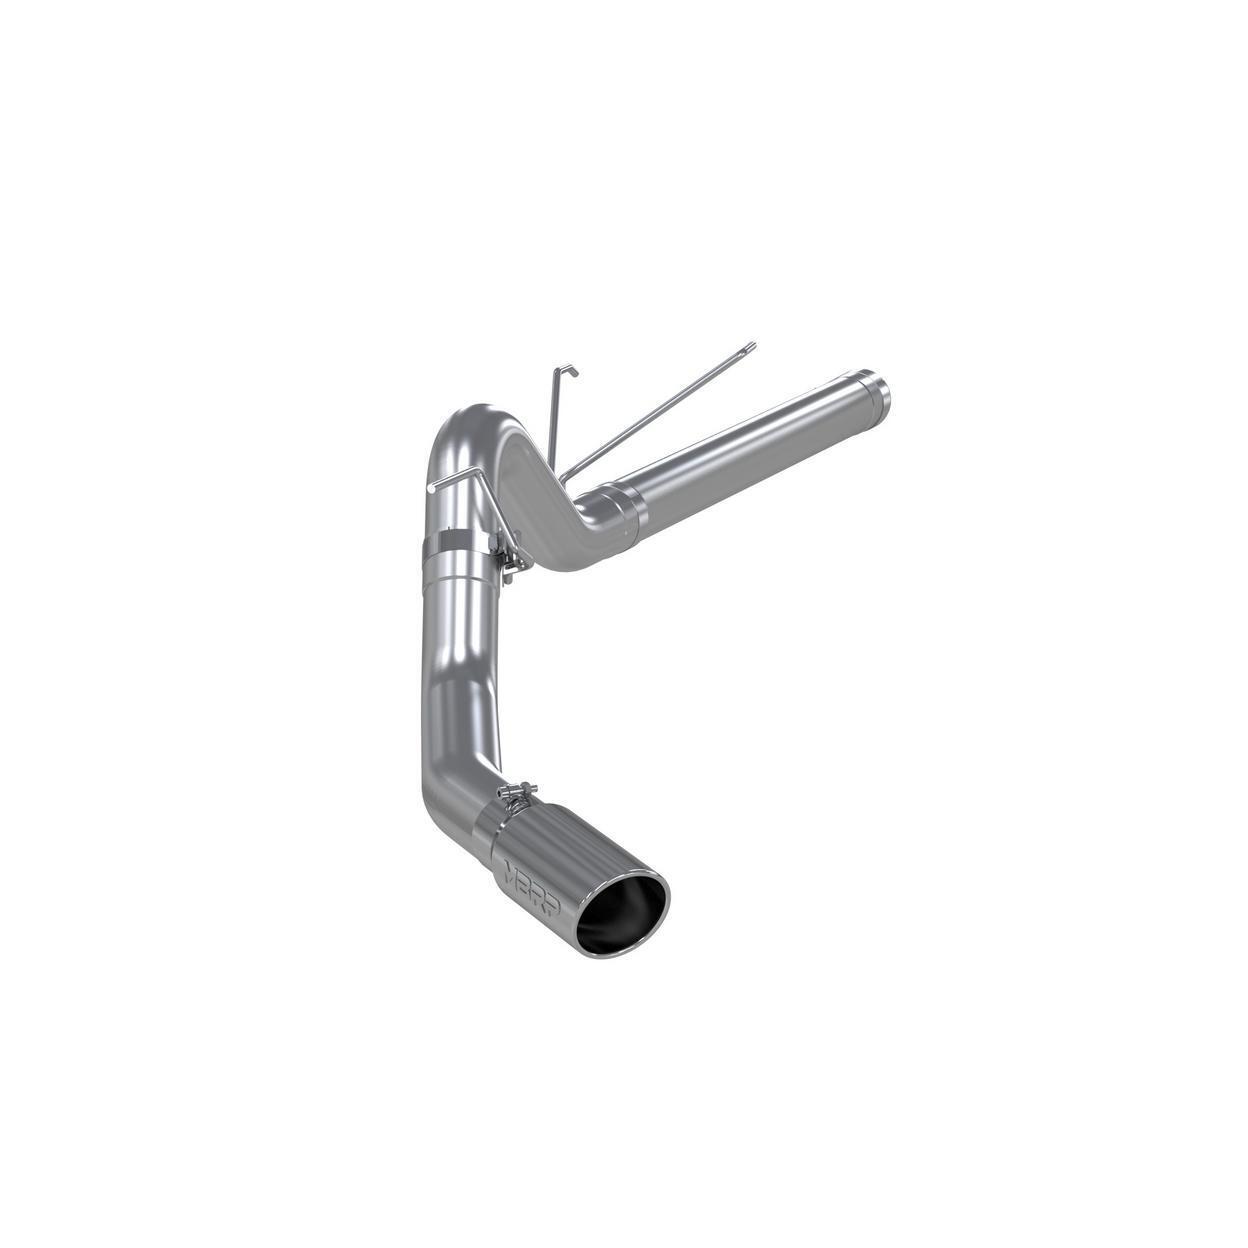 MBRP Exhaust System Kit for 2008-2009 Dodge Ram 3500